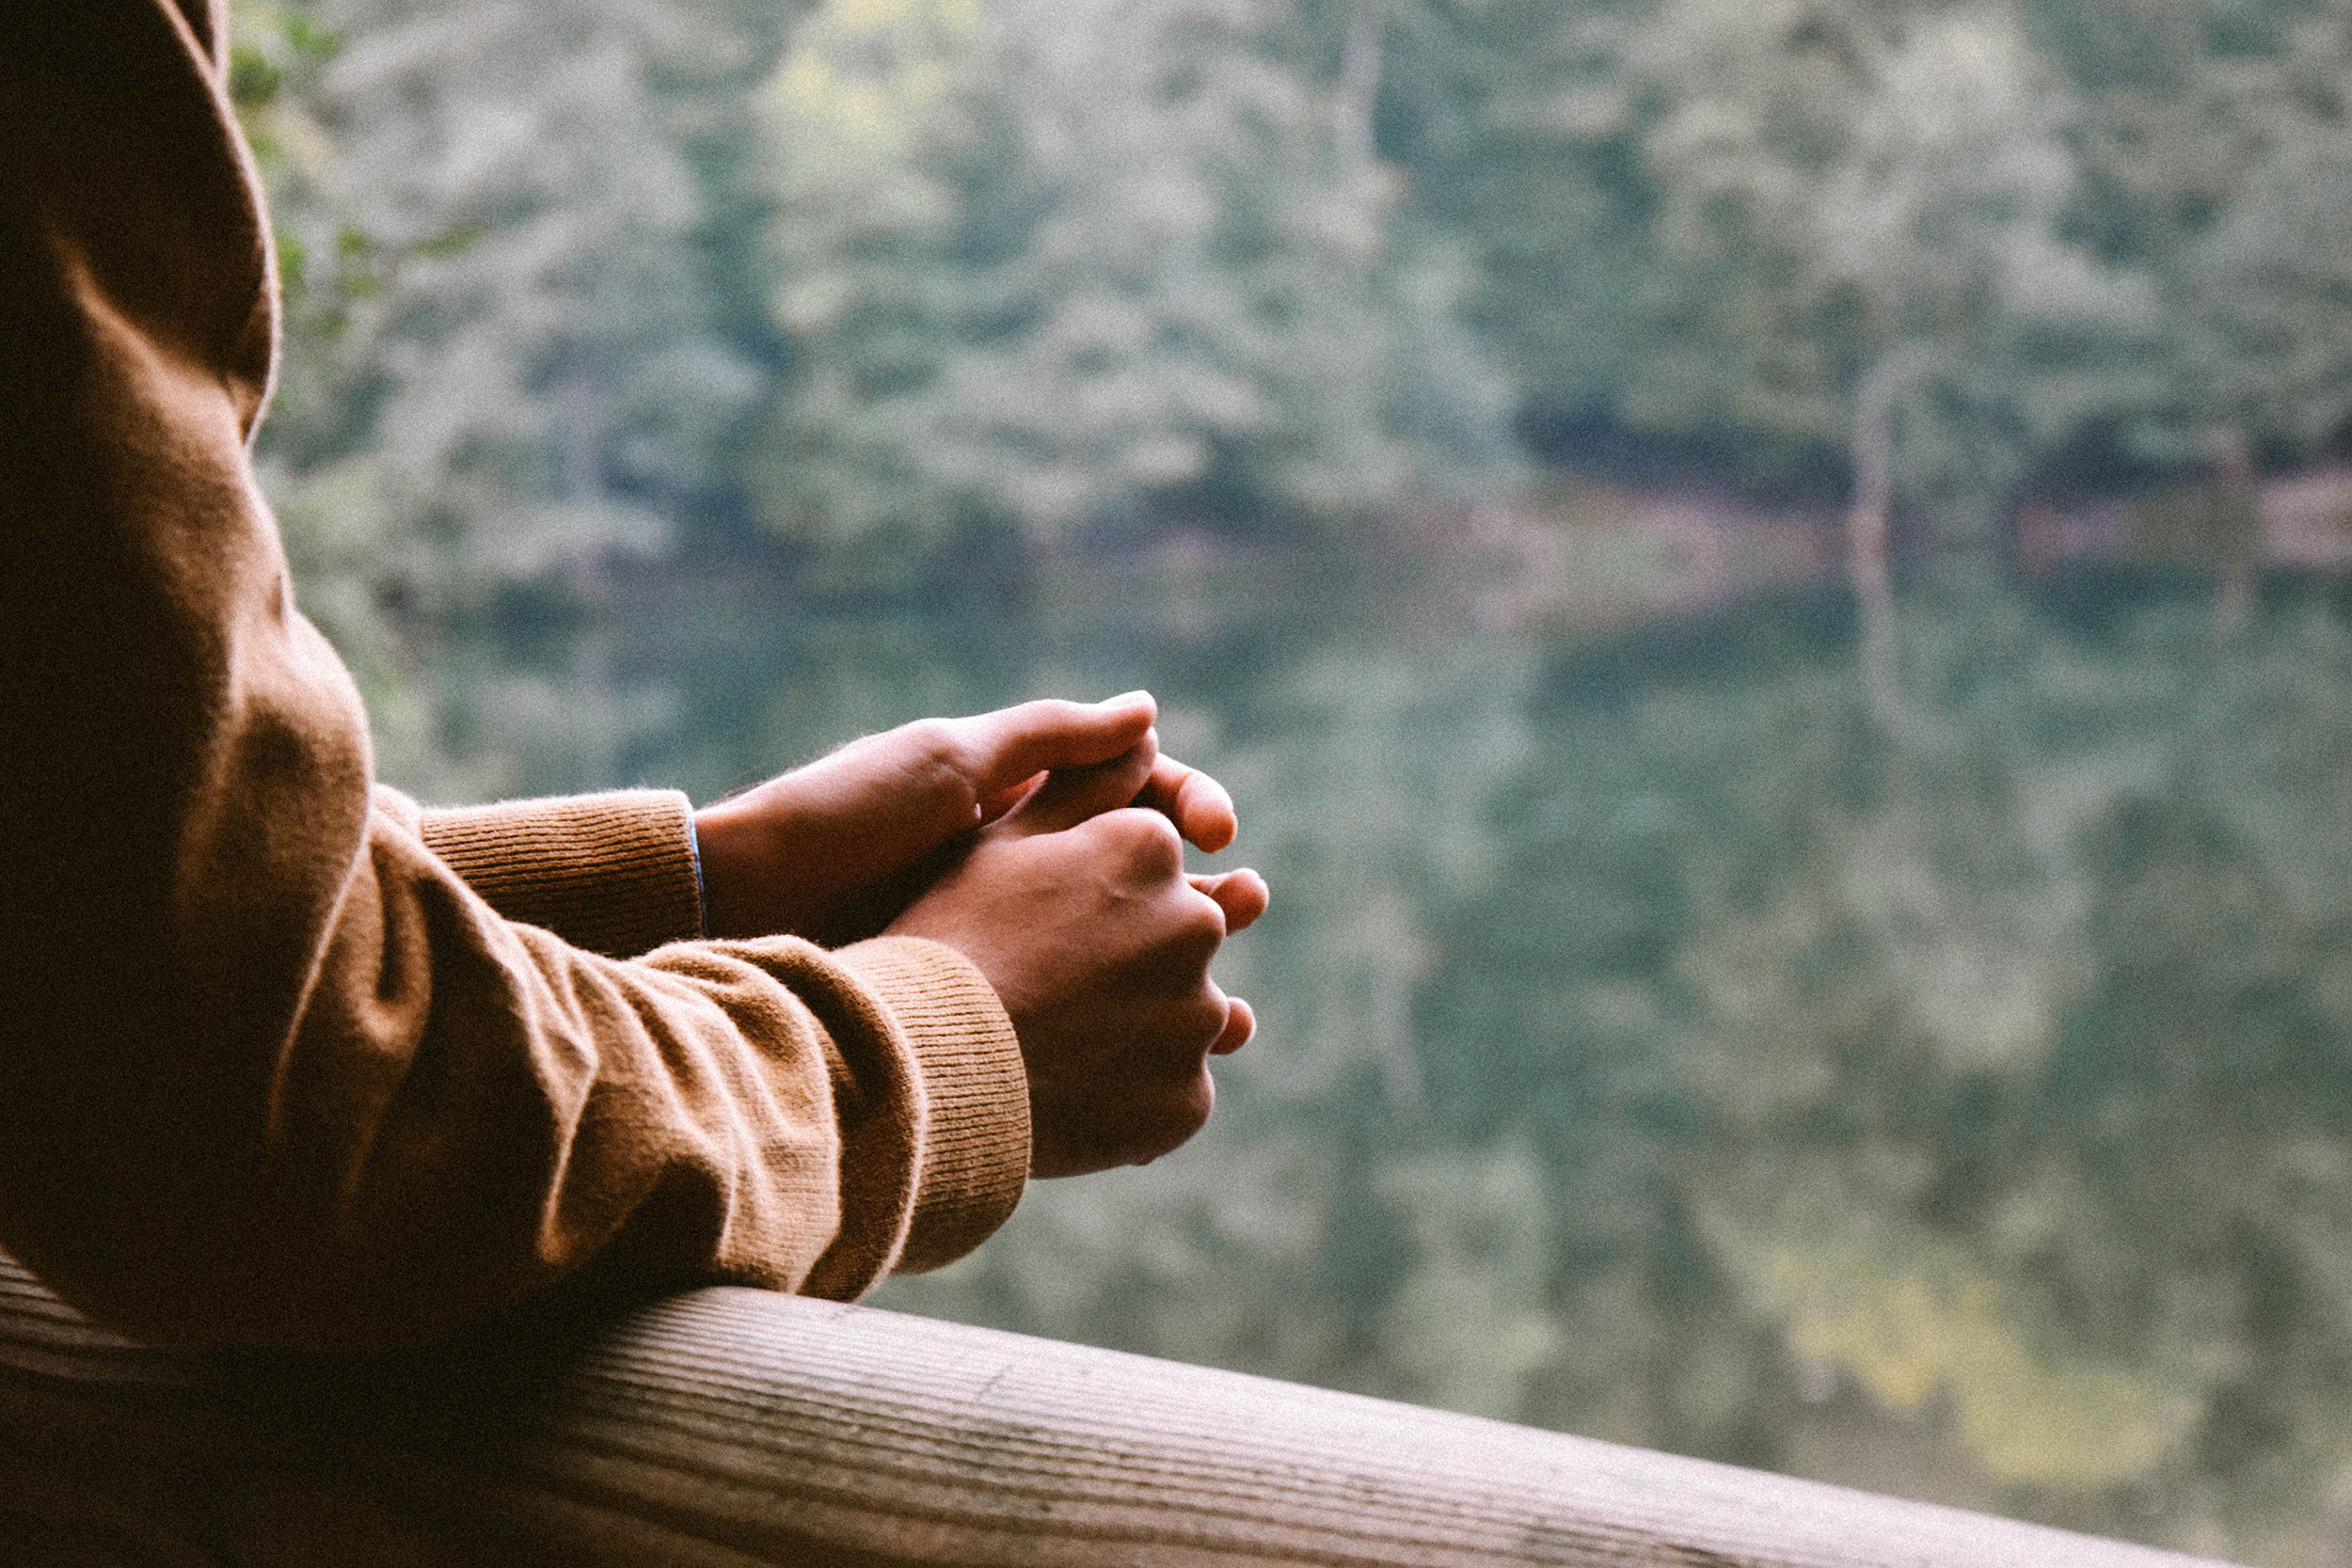 Close-up photo of the hands of a person leaving over a deck overlooking a lake surrounded by trees.